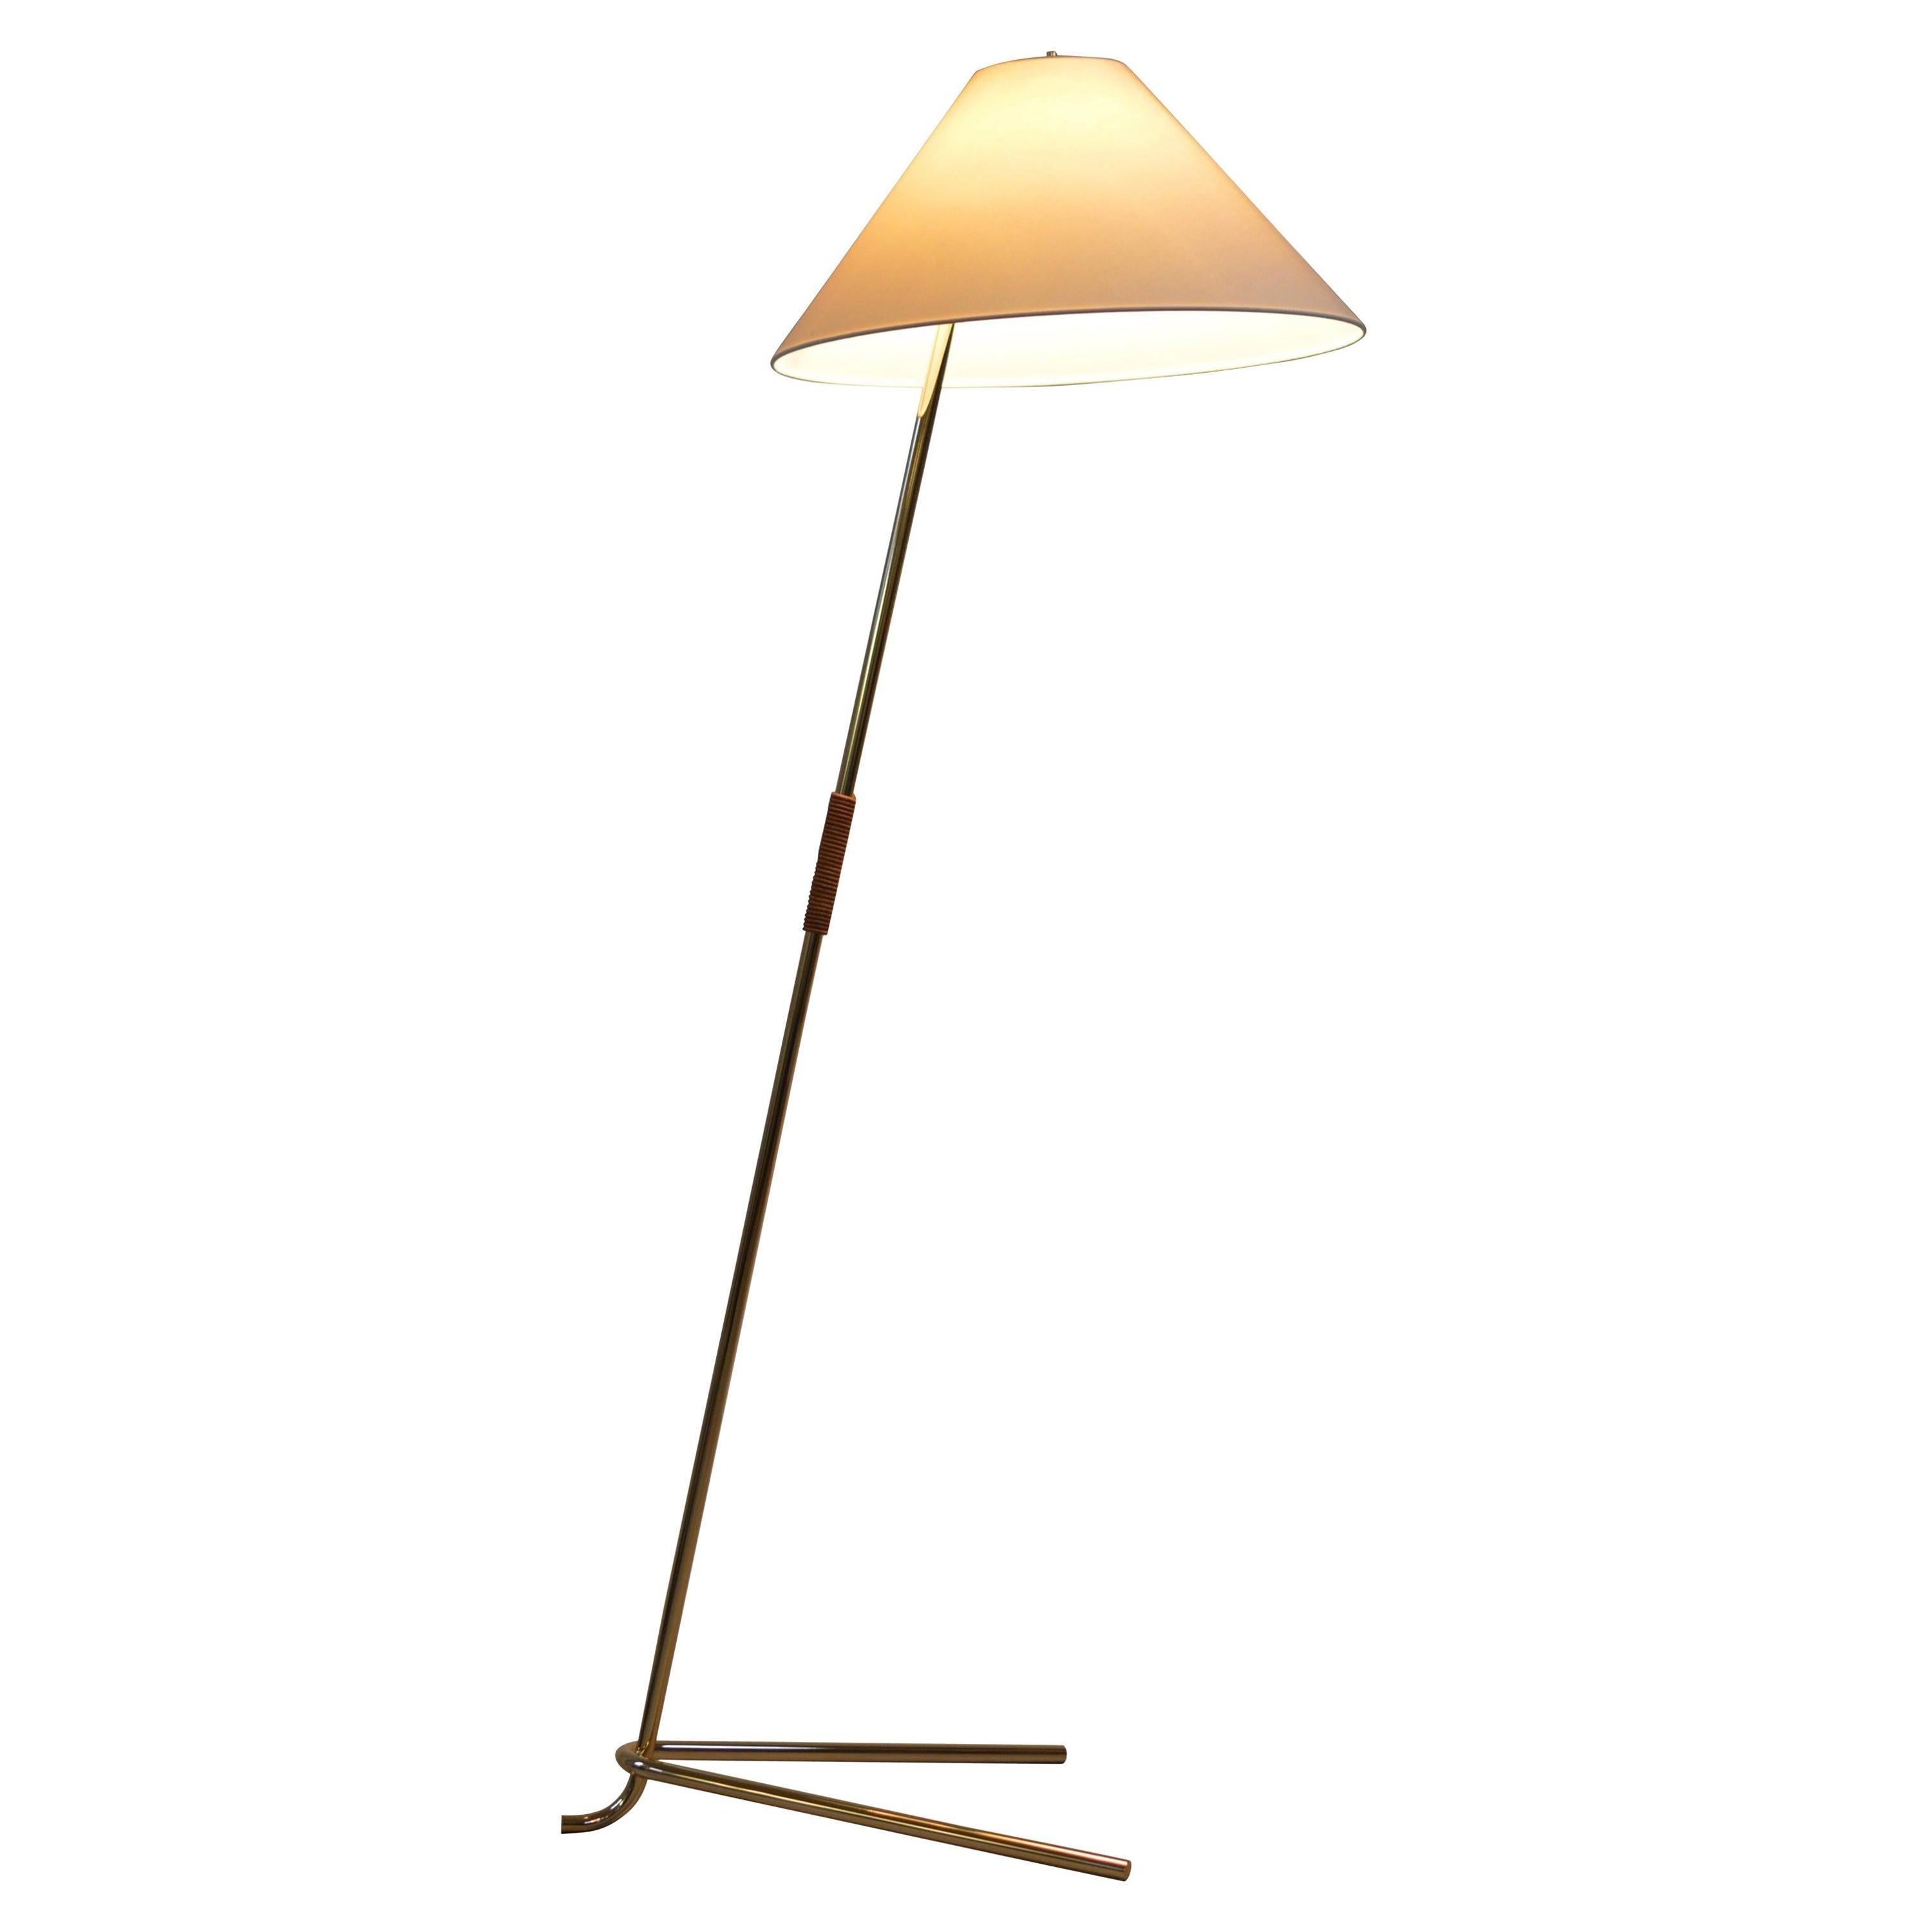 Brass & Leather 'Hase BL' Floor Lamp by J.T. Kalmar - SHIPS FROM STOCK For Sale